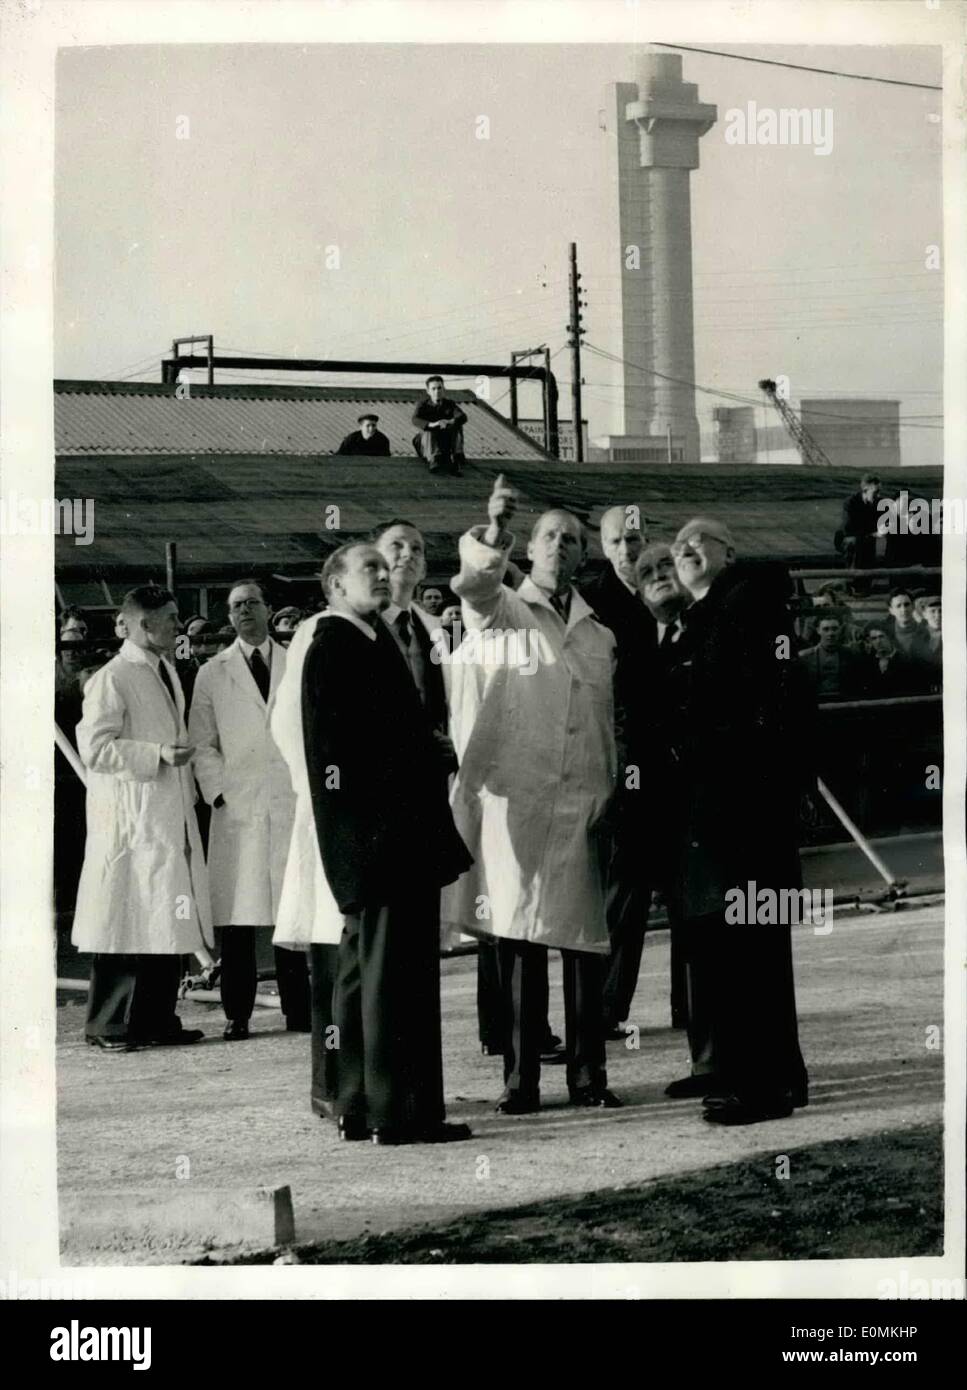 Nov. 11, 1955 - Duke of Edinburgh visits Calder Hall atomic power station. H.R.H. The duke of Edinburgh recently visited Britain's first atomic power station at Calder Hall, Cumberland.. Photo shows:- The duke of Edinburgh seen during his tour of the station showing the Windscale piles in background.. The group includes Mr. G.H. Davey, general Manager (1st. left); Sir Edwin Plowden, Chairman of the U.K.A.E.A. (2nd. left) and Sir Christopher Hinton (6th. left) Stock Photo